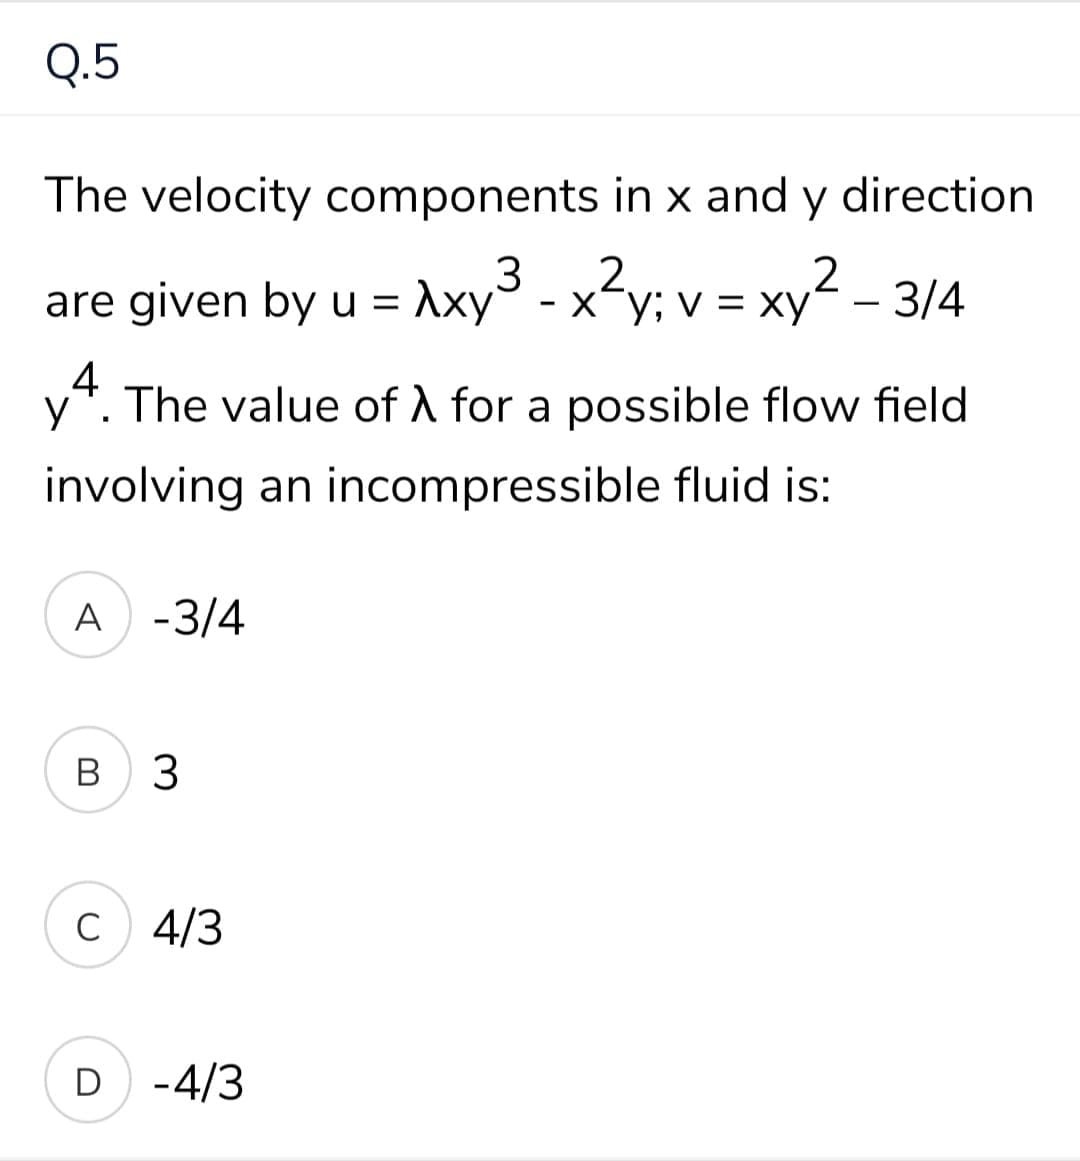 Q.5
The velocity components in x and y direction
2
are given by u = Axy° - xy; v = >
ху; v — ху
= xy² – 3/4
.4
y*. The value of A for a possible flow field
involving an incompressible fluid is:
A -3/4
В
3
C
4/3
D -4/3
